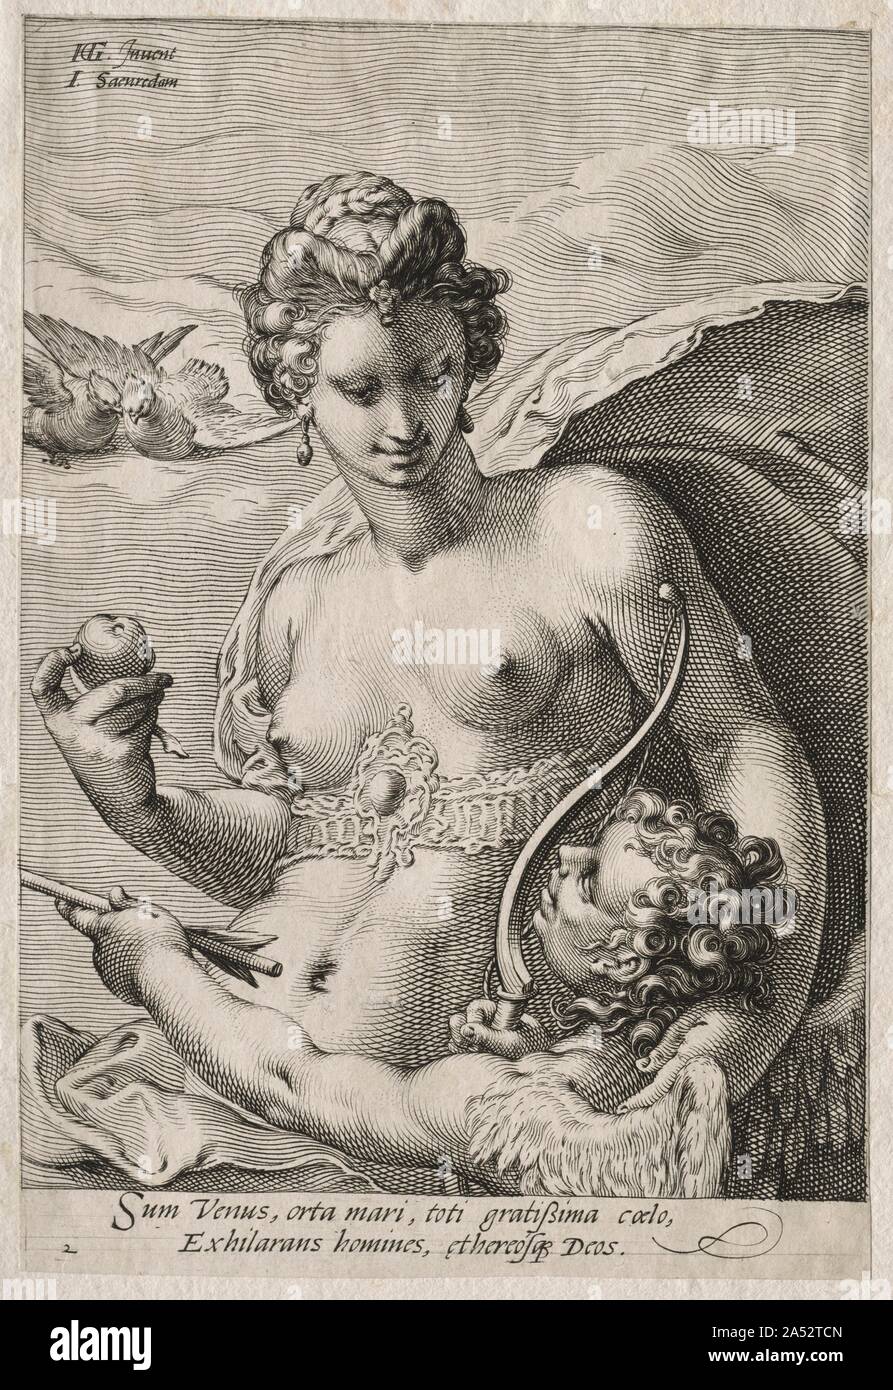 Venus and Cupid, c. 1595. Goltzius popularized a style of engraving with mesmerizing patterns of curving, tapering, and crisscrossing lines; it was especially appreciated in the late 1500s. Designed for his pupil Saenredam to engrave, these prints depict the three goddesses from the tale of  The Judgment of Paris , in which each claimed the golden apple to be awarded to the most beautiful. Jupiter deferred judgment to Paris, a mortal esteemed for his fair-mindedness. Juno and Athena tried to bribe Paris with an empire and skill in war, but Venus made him an offer he could not resist: Helen, th Stock Photo